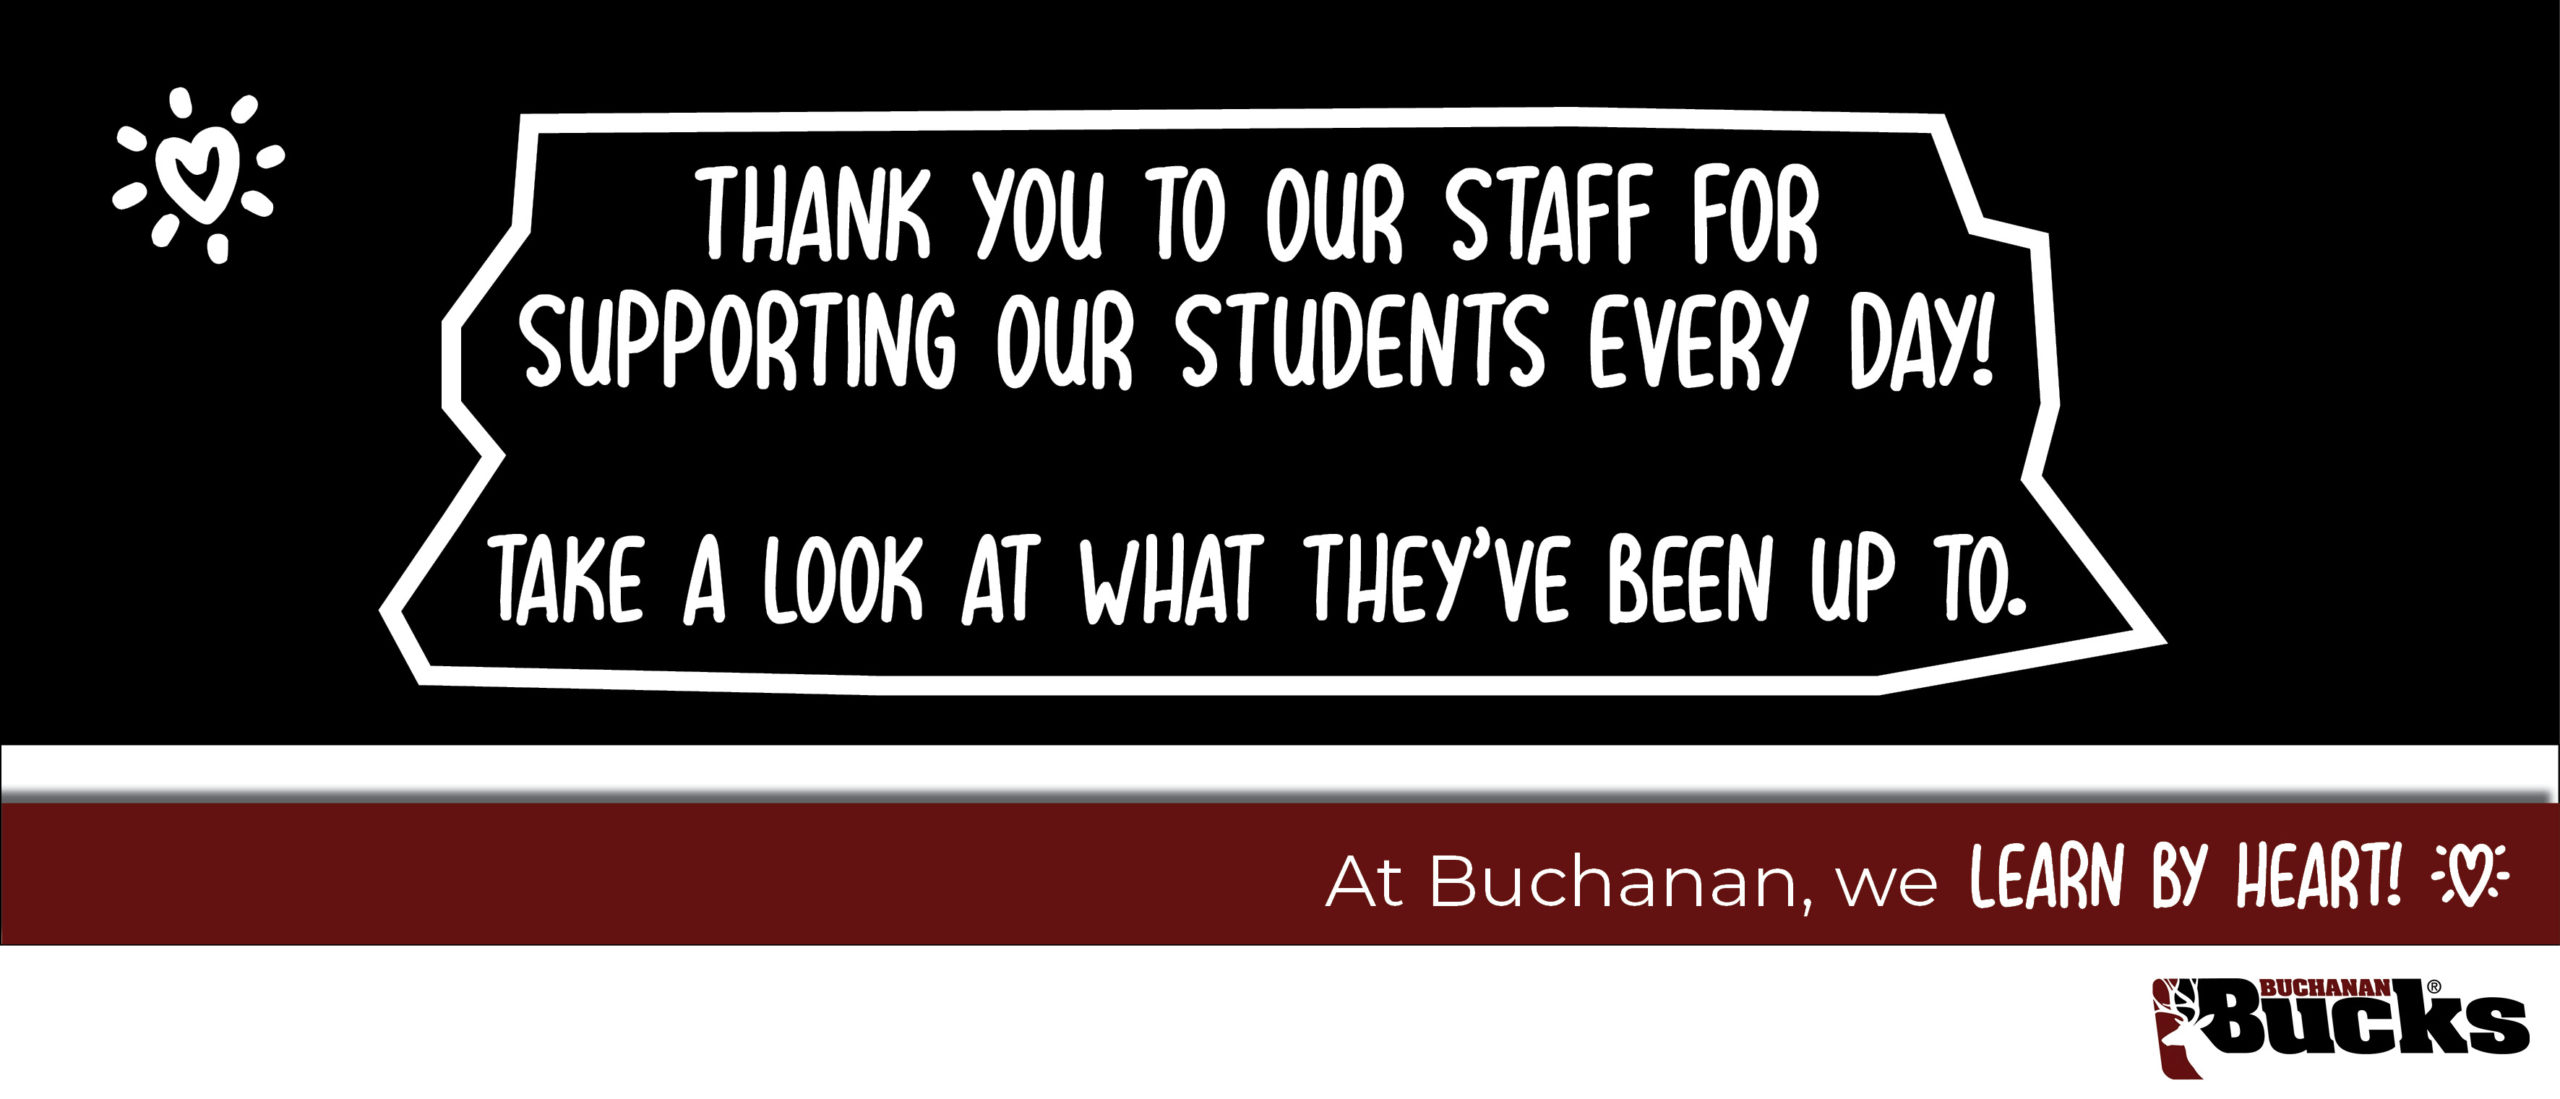 Thank you to our staff for supporting our students every day! Take a look at what They've been up to. At Buchanan, we learn by heart.